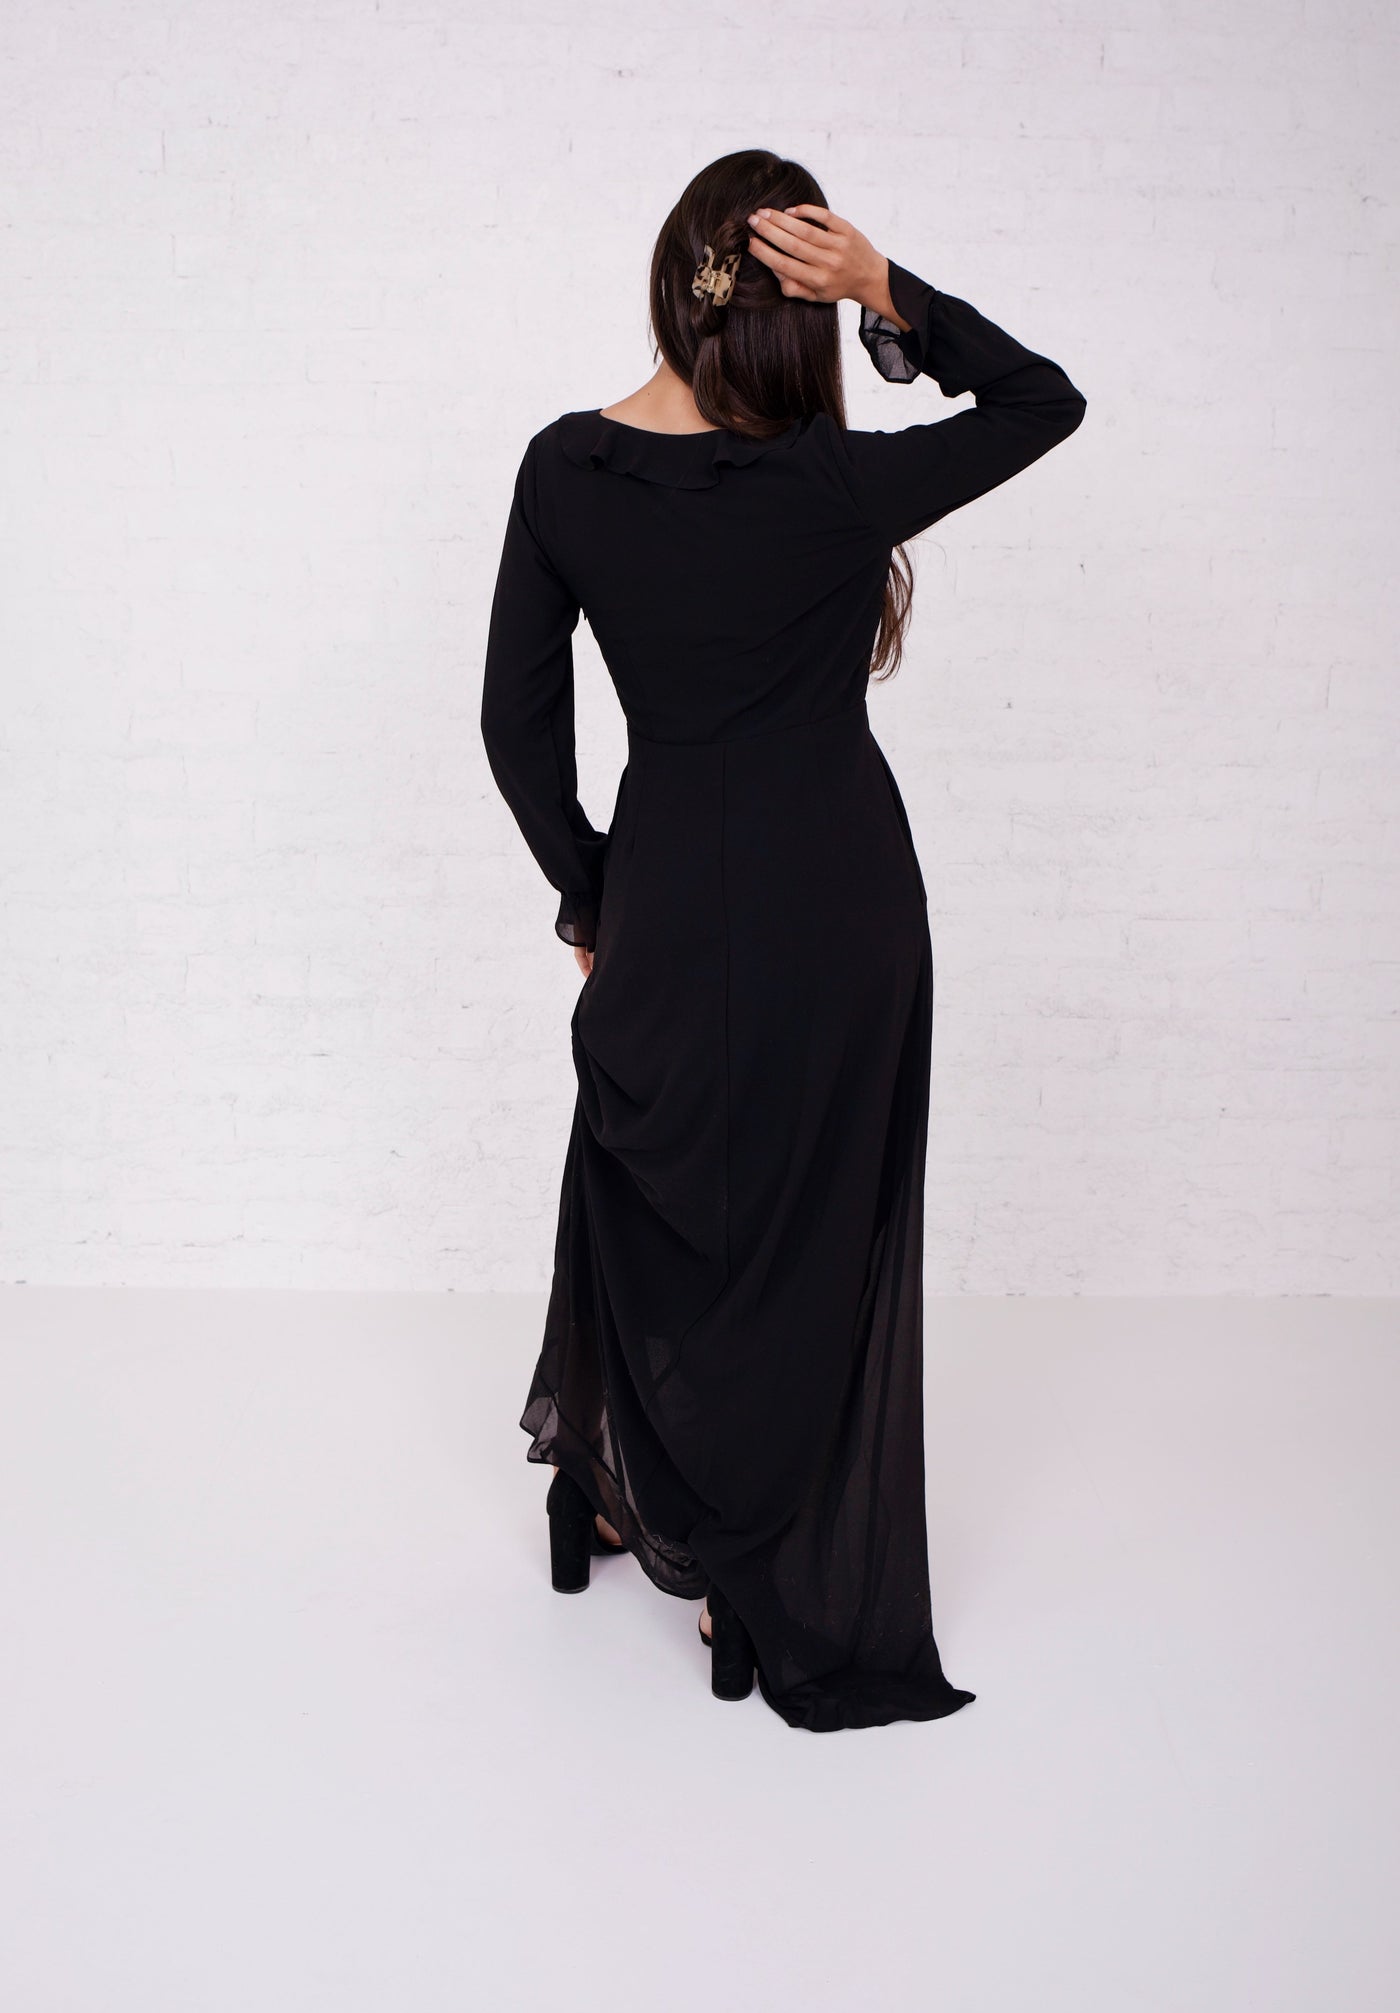 The Marley Dress in Black-W Dress-Graceful & Chic Boutique, Family Clothing Store in Waxahachie, Texas